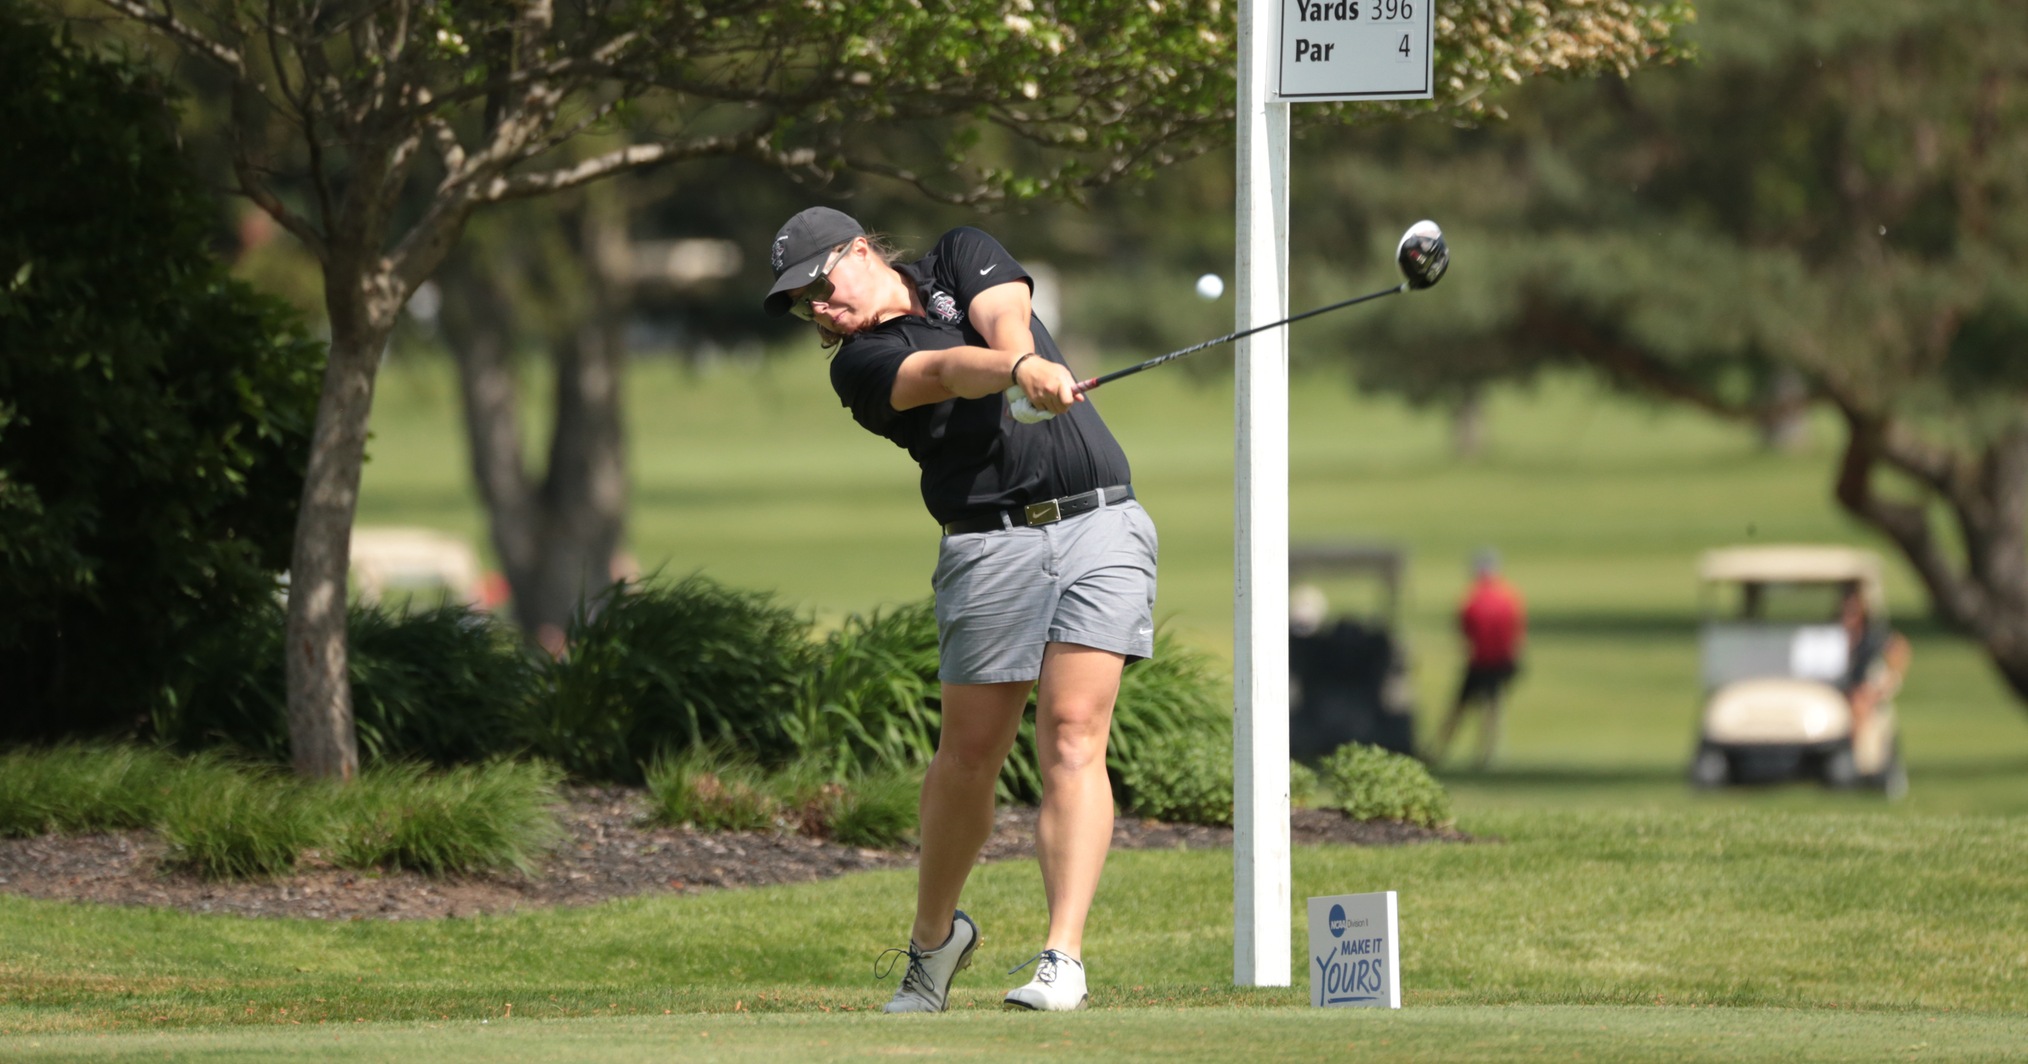 Morrison Climbs Into Top-25 With Strong Second Round at NCAA Championships